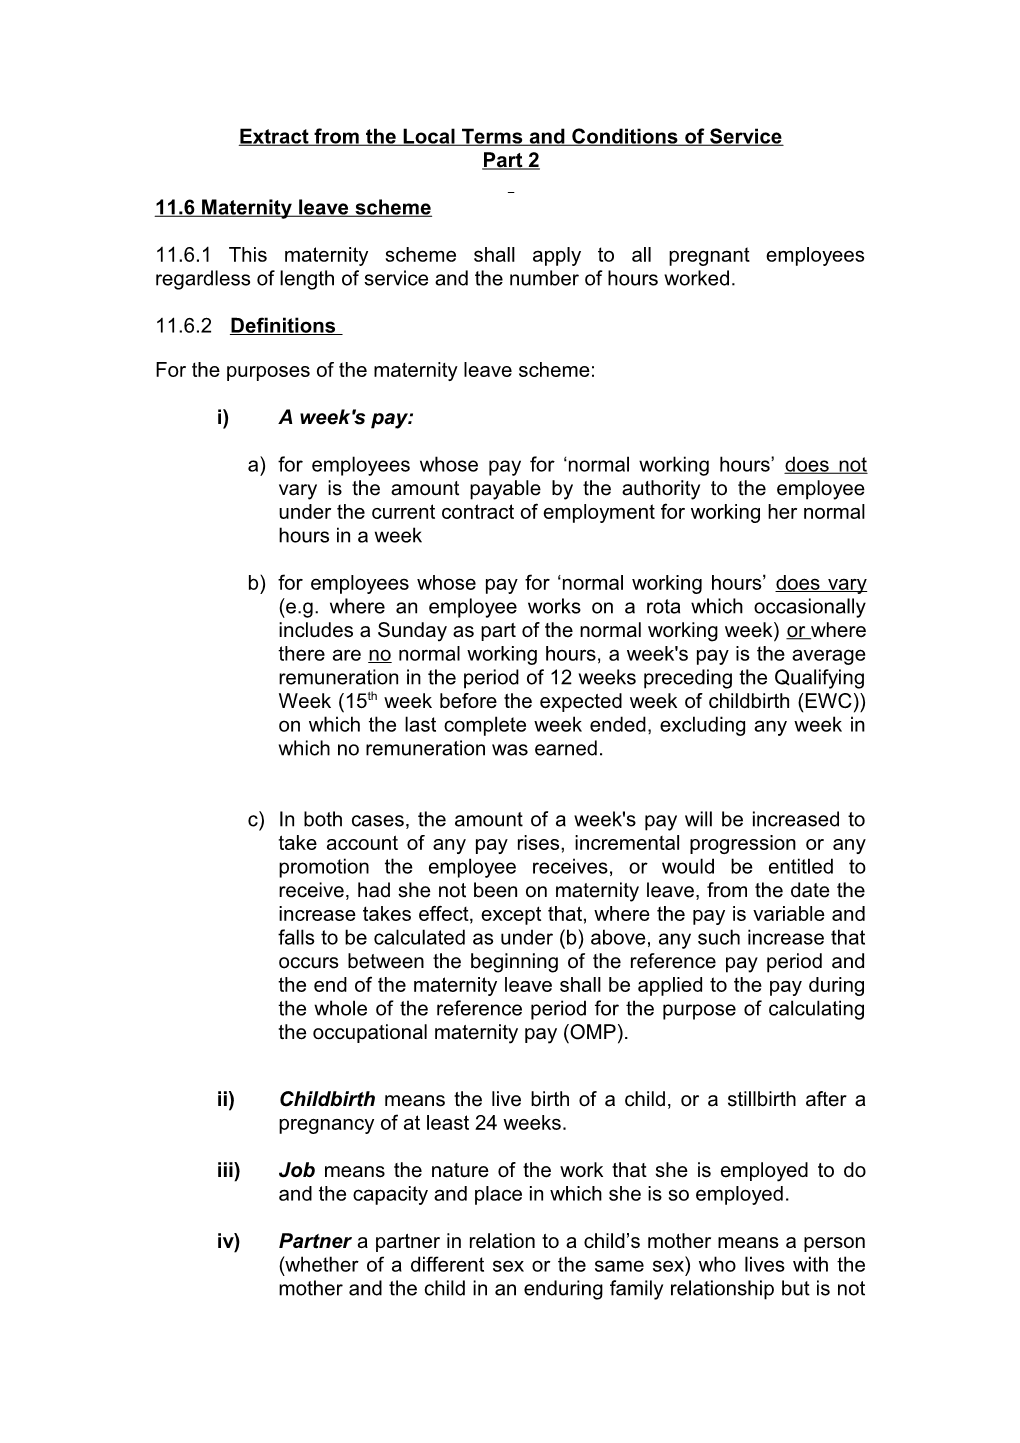 Extract from the Local Terms and Conditions of Service